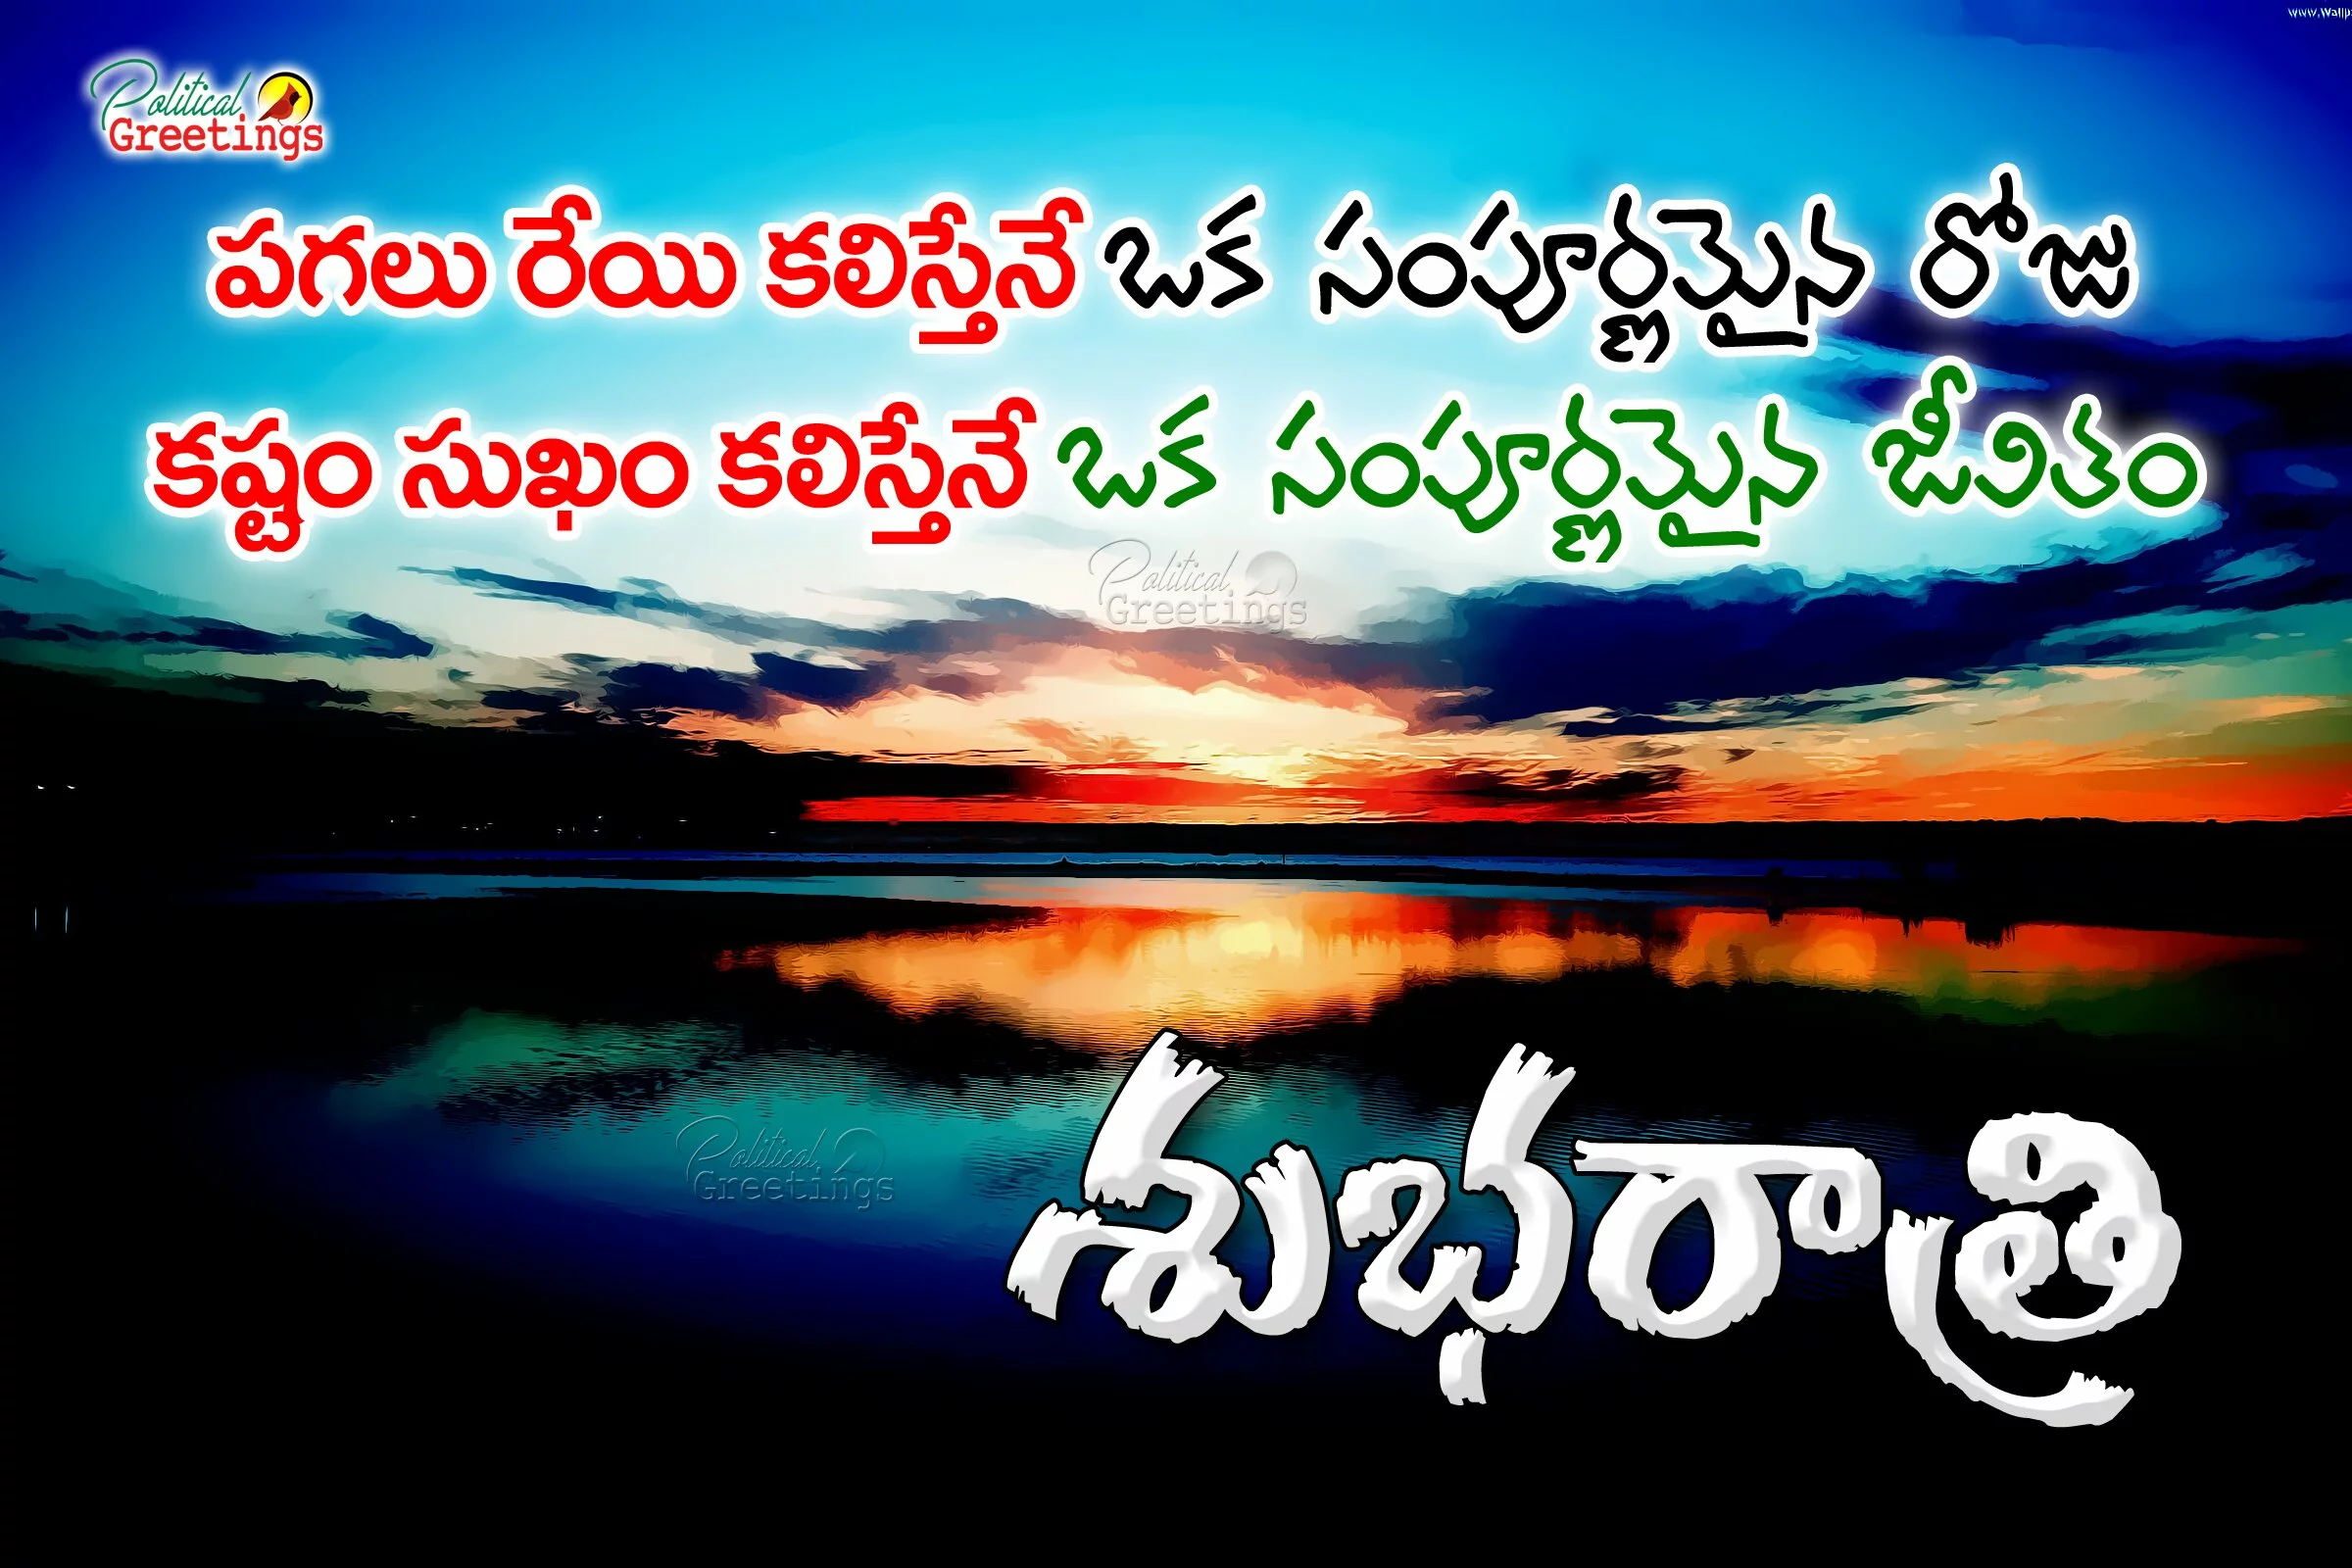 telugu-good-night-victory-wishes-quotes-and-greetings13